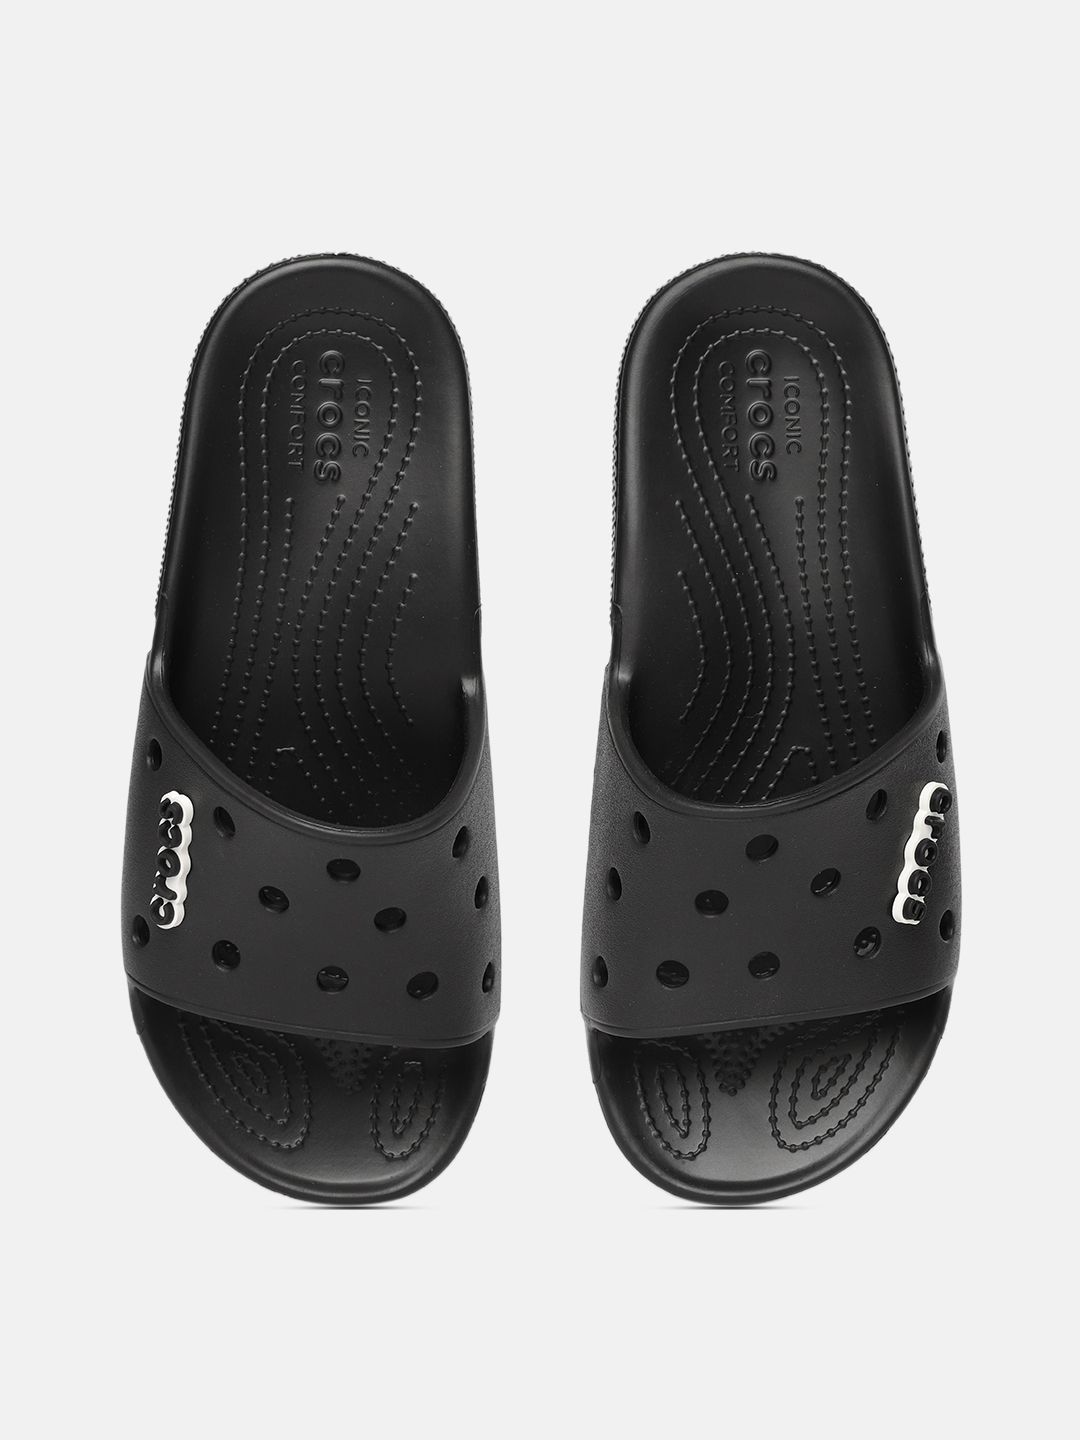 Crocs Unisex Black Cut-Outs Croslite Sliders with Brand Logo Applique Detail Price in India